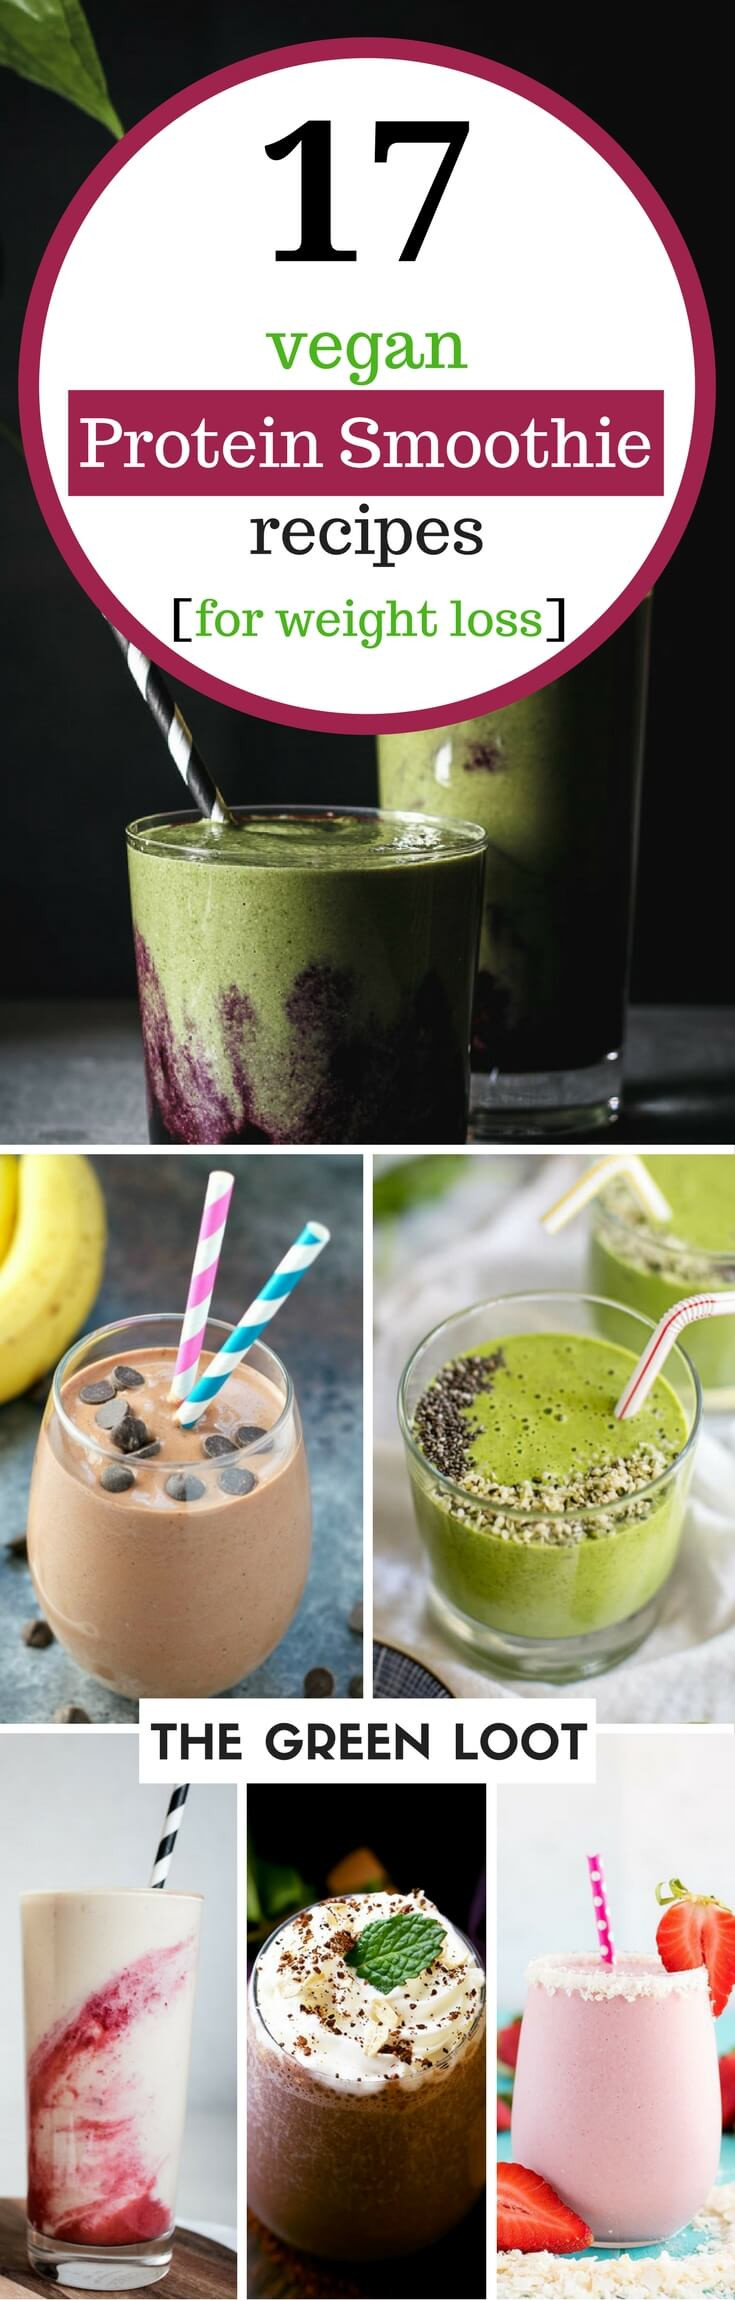 Weight Loss Smoothie Recipes With Whey Protein
 17 Tasty Vegan Protein Smoothie Recipes for Weight Loss